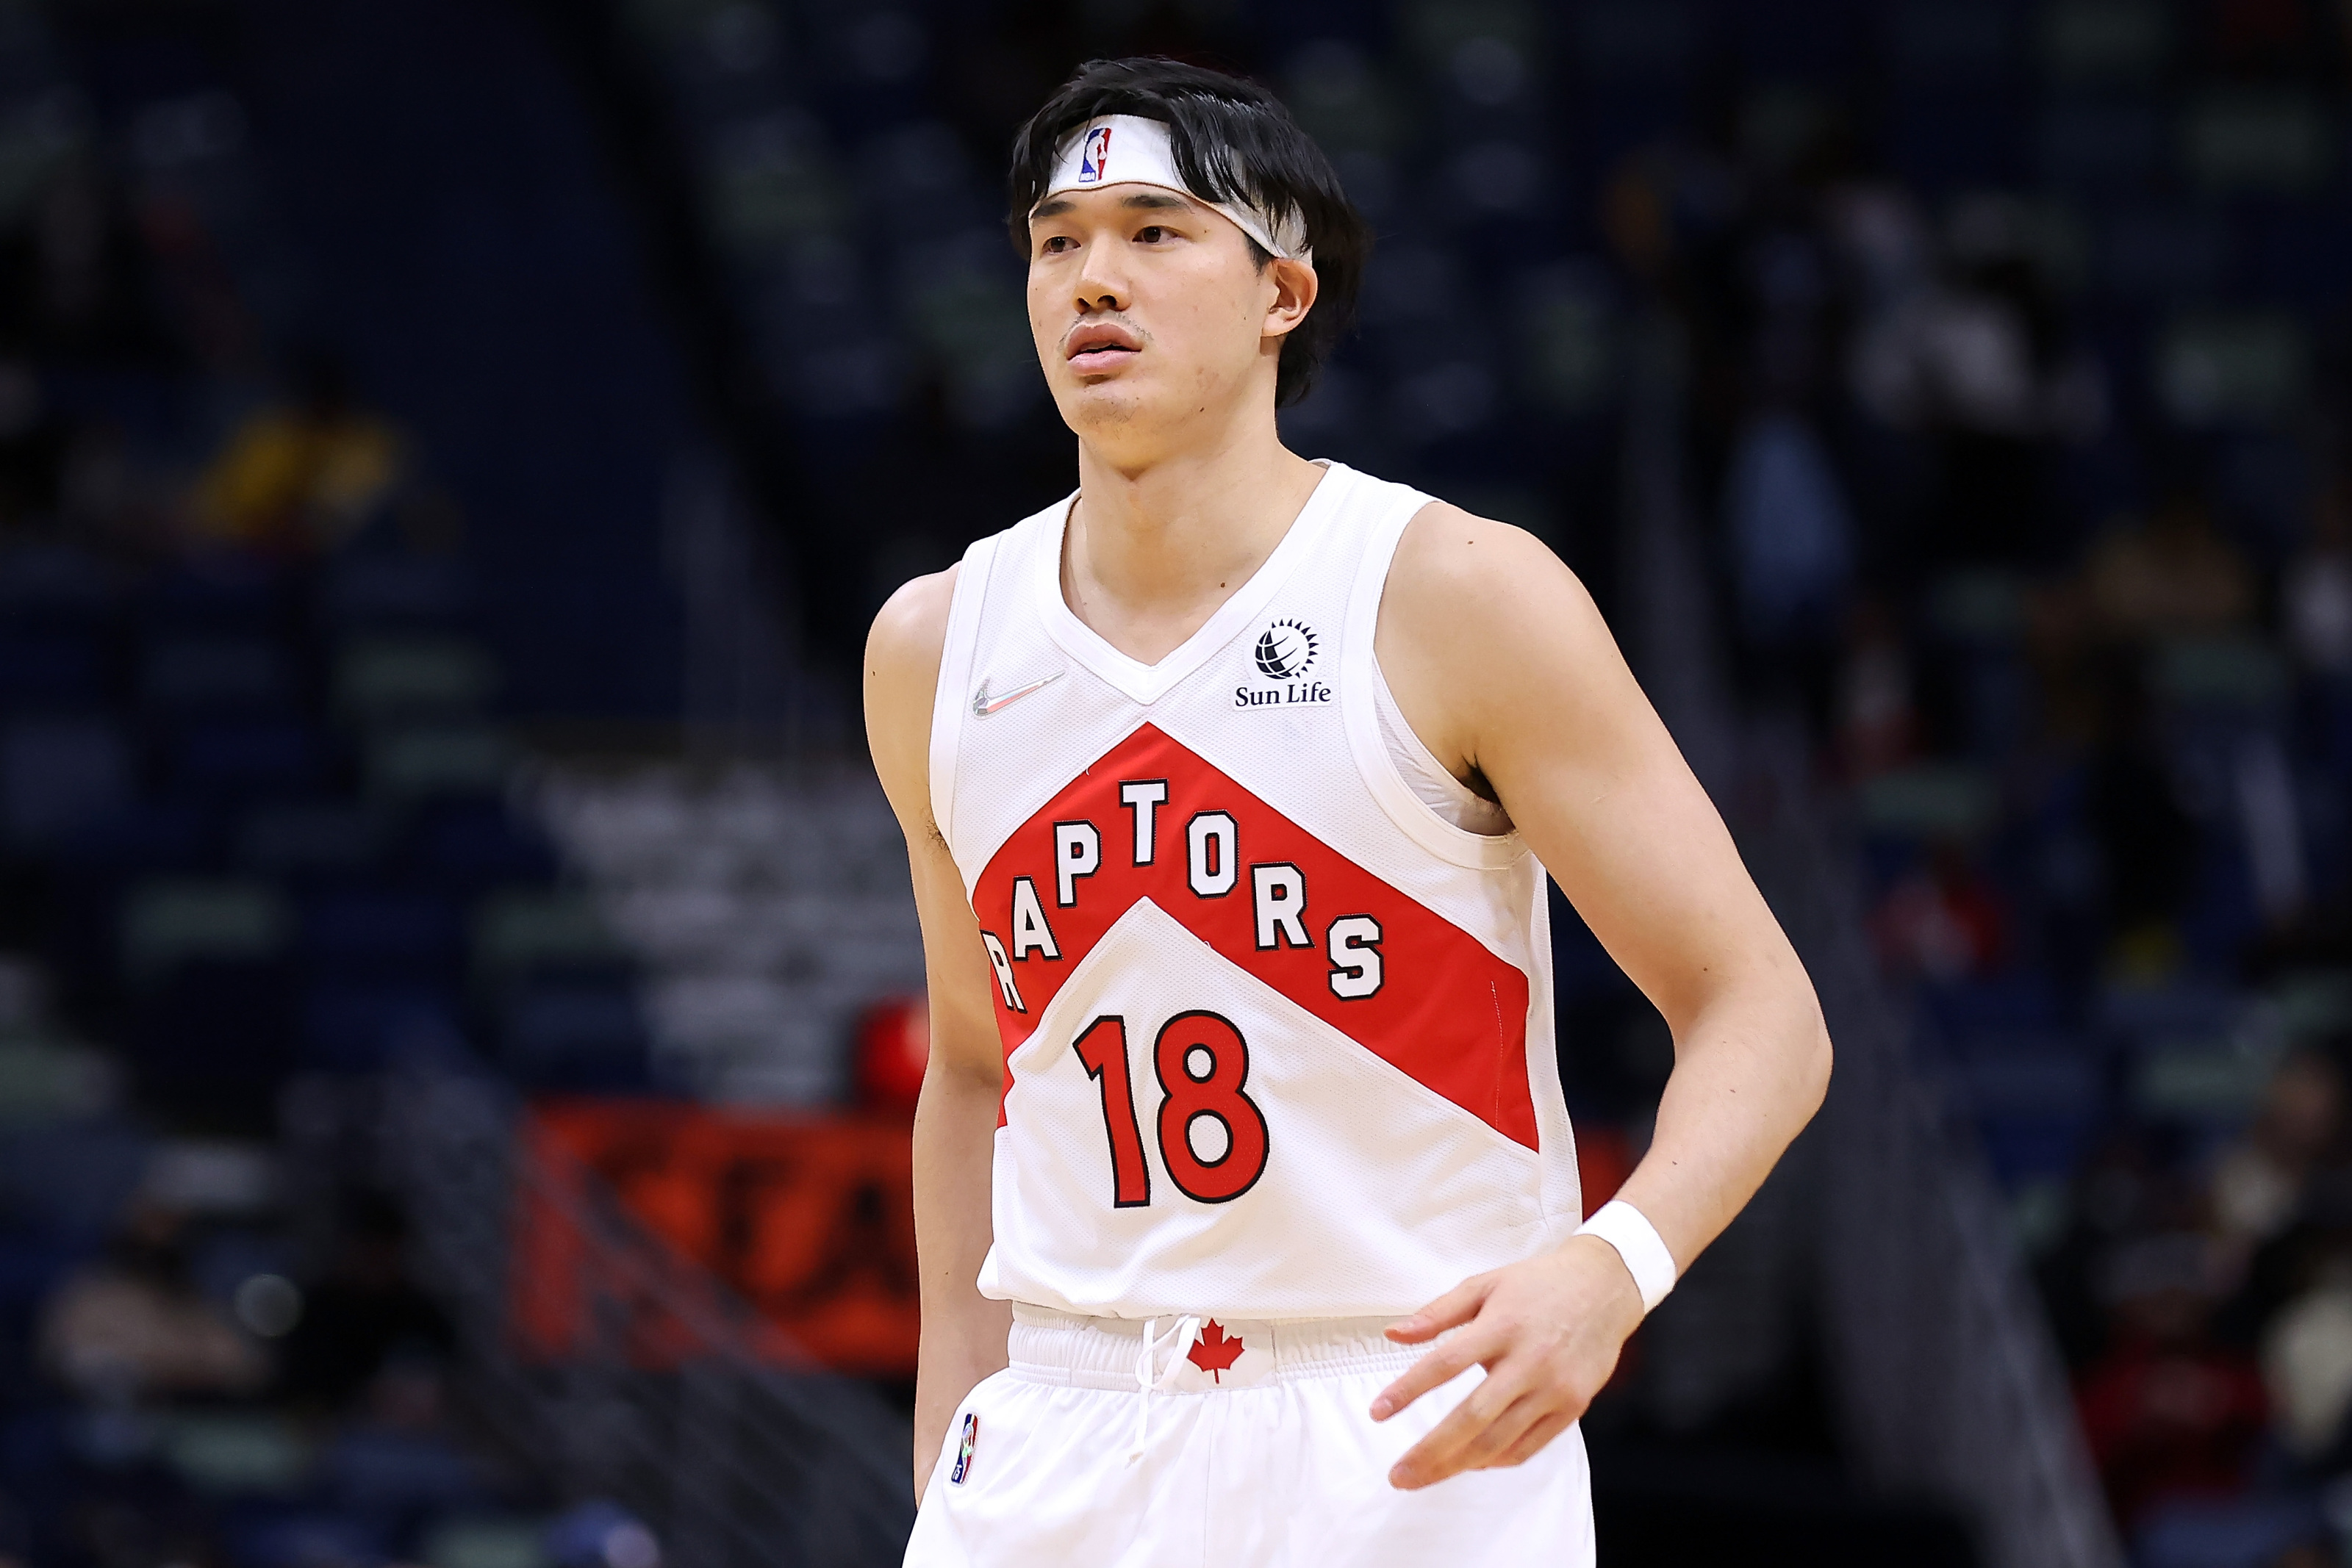 Yuta Watanabe signs deal with Nets - The Japan Times